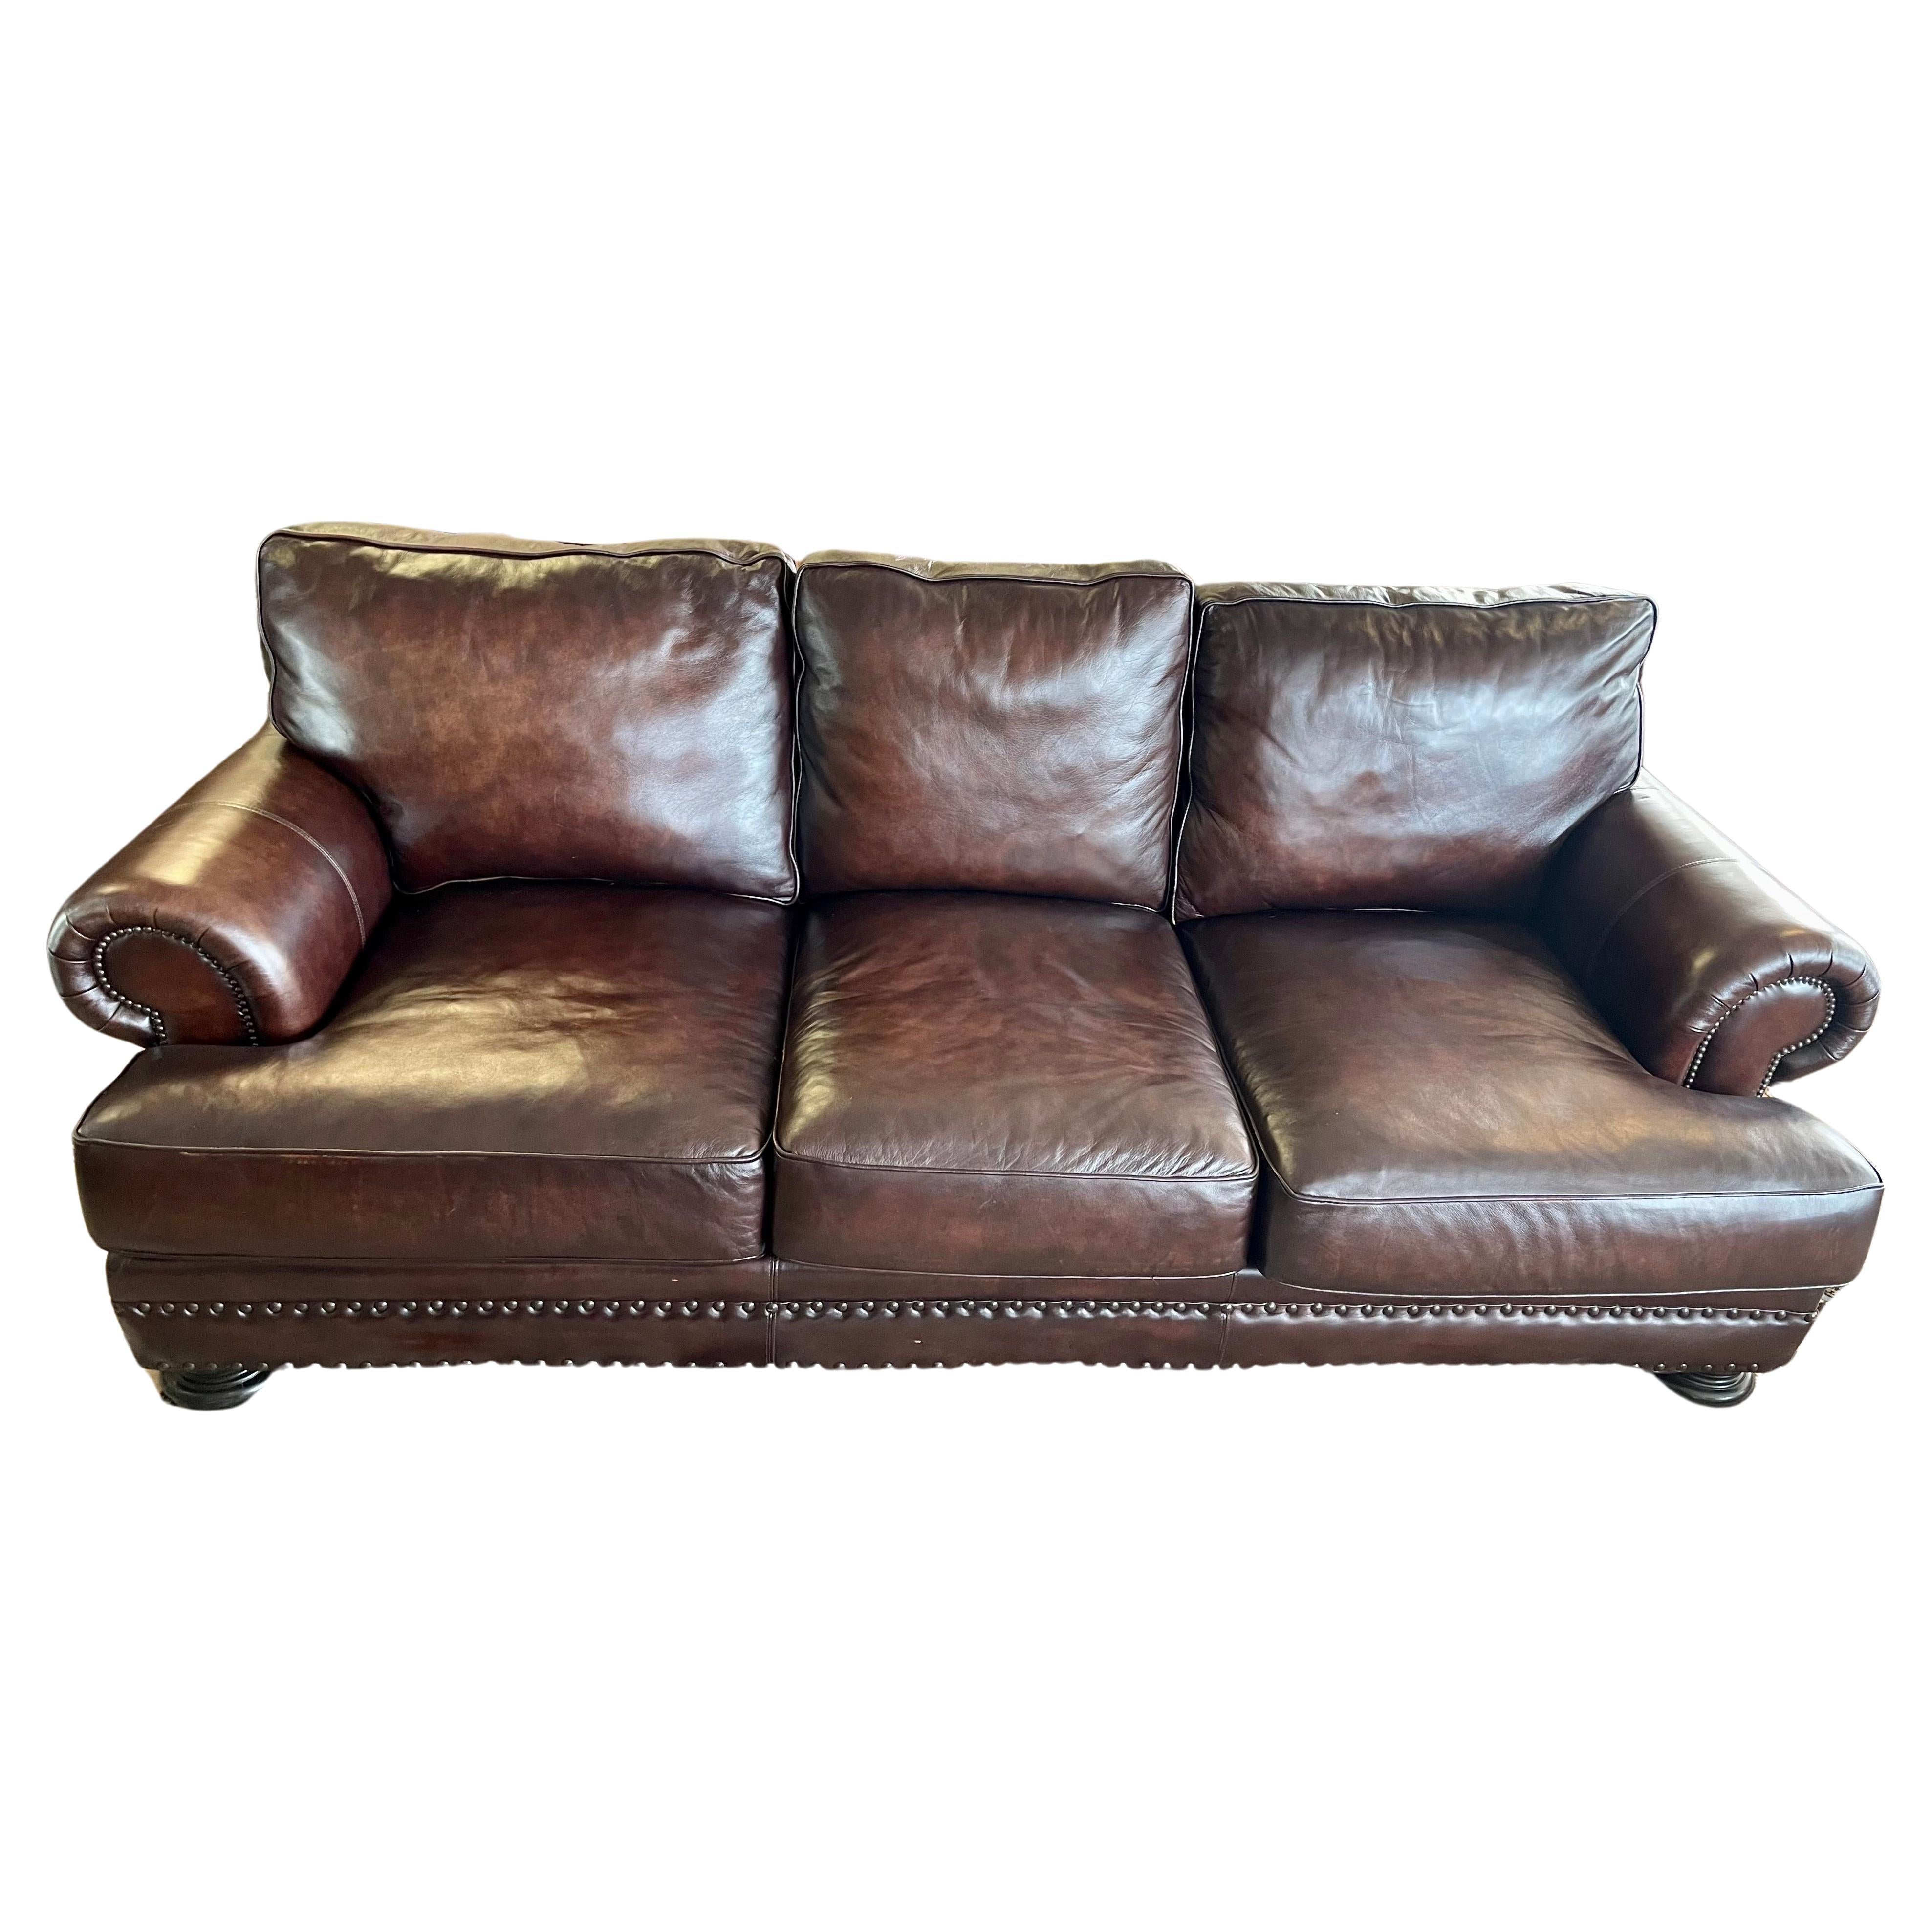 Bernhardt, one of the great makers of leather furniture, never disappoints.
This sofa is broken in just right and the patina on the leather is next level.
Why not own the best?  Depending on where you live, we may be able to do better on the quoted